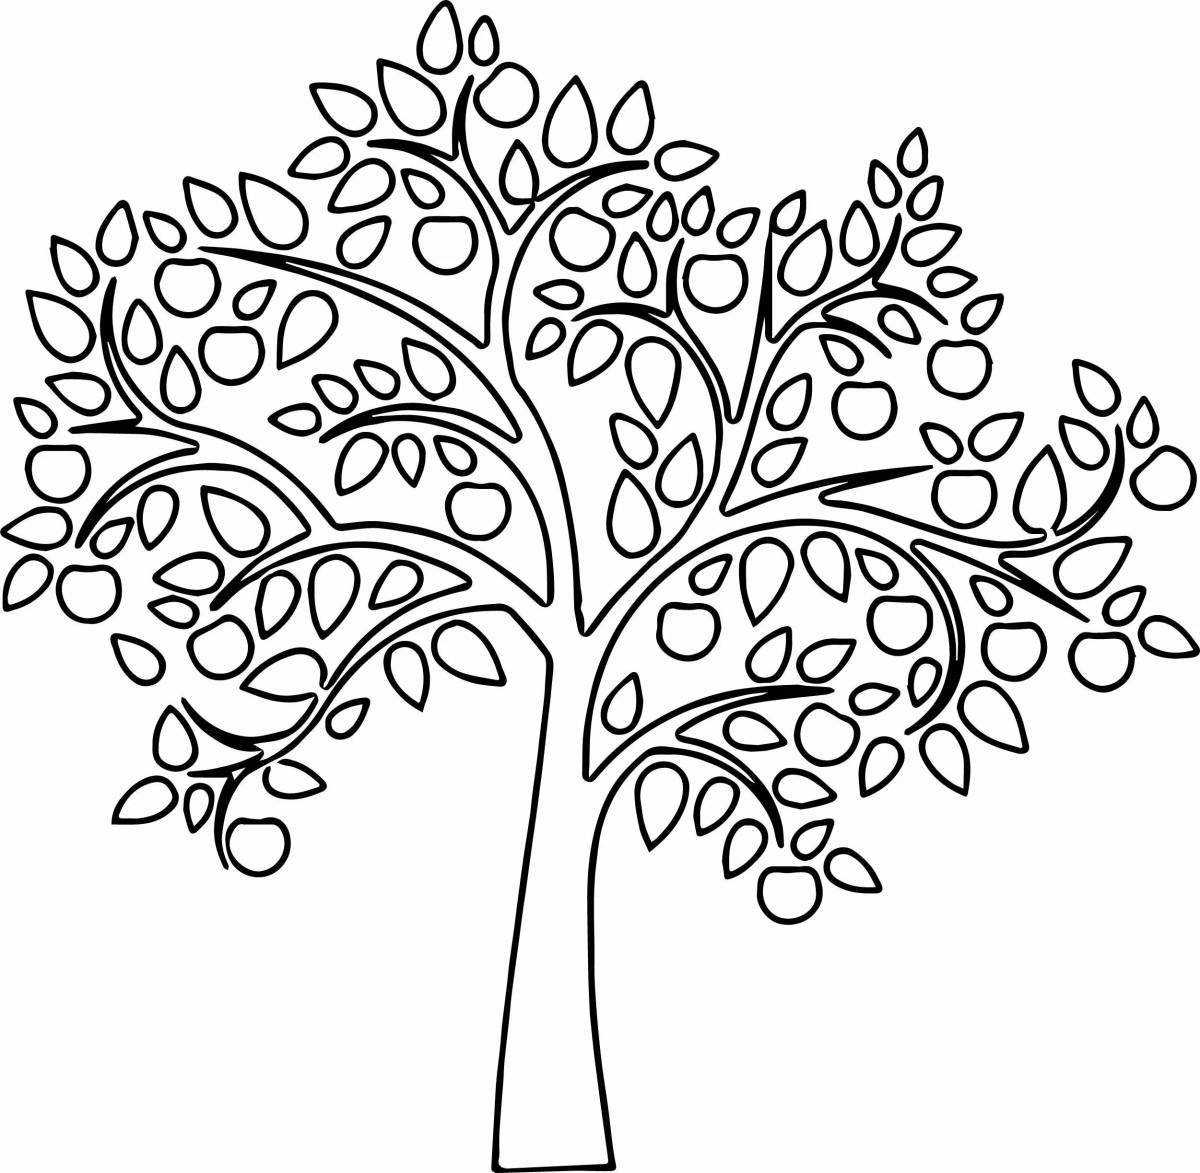 Great coloring tree without leaves outline